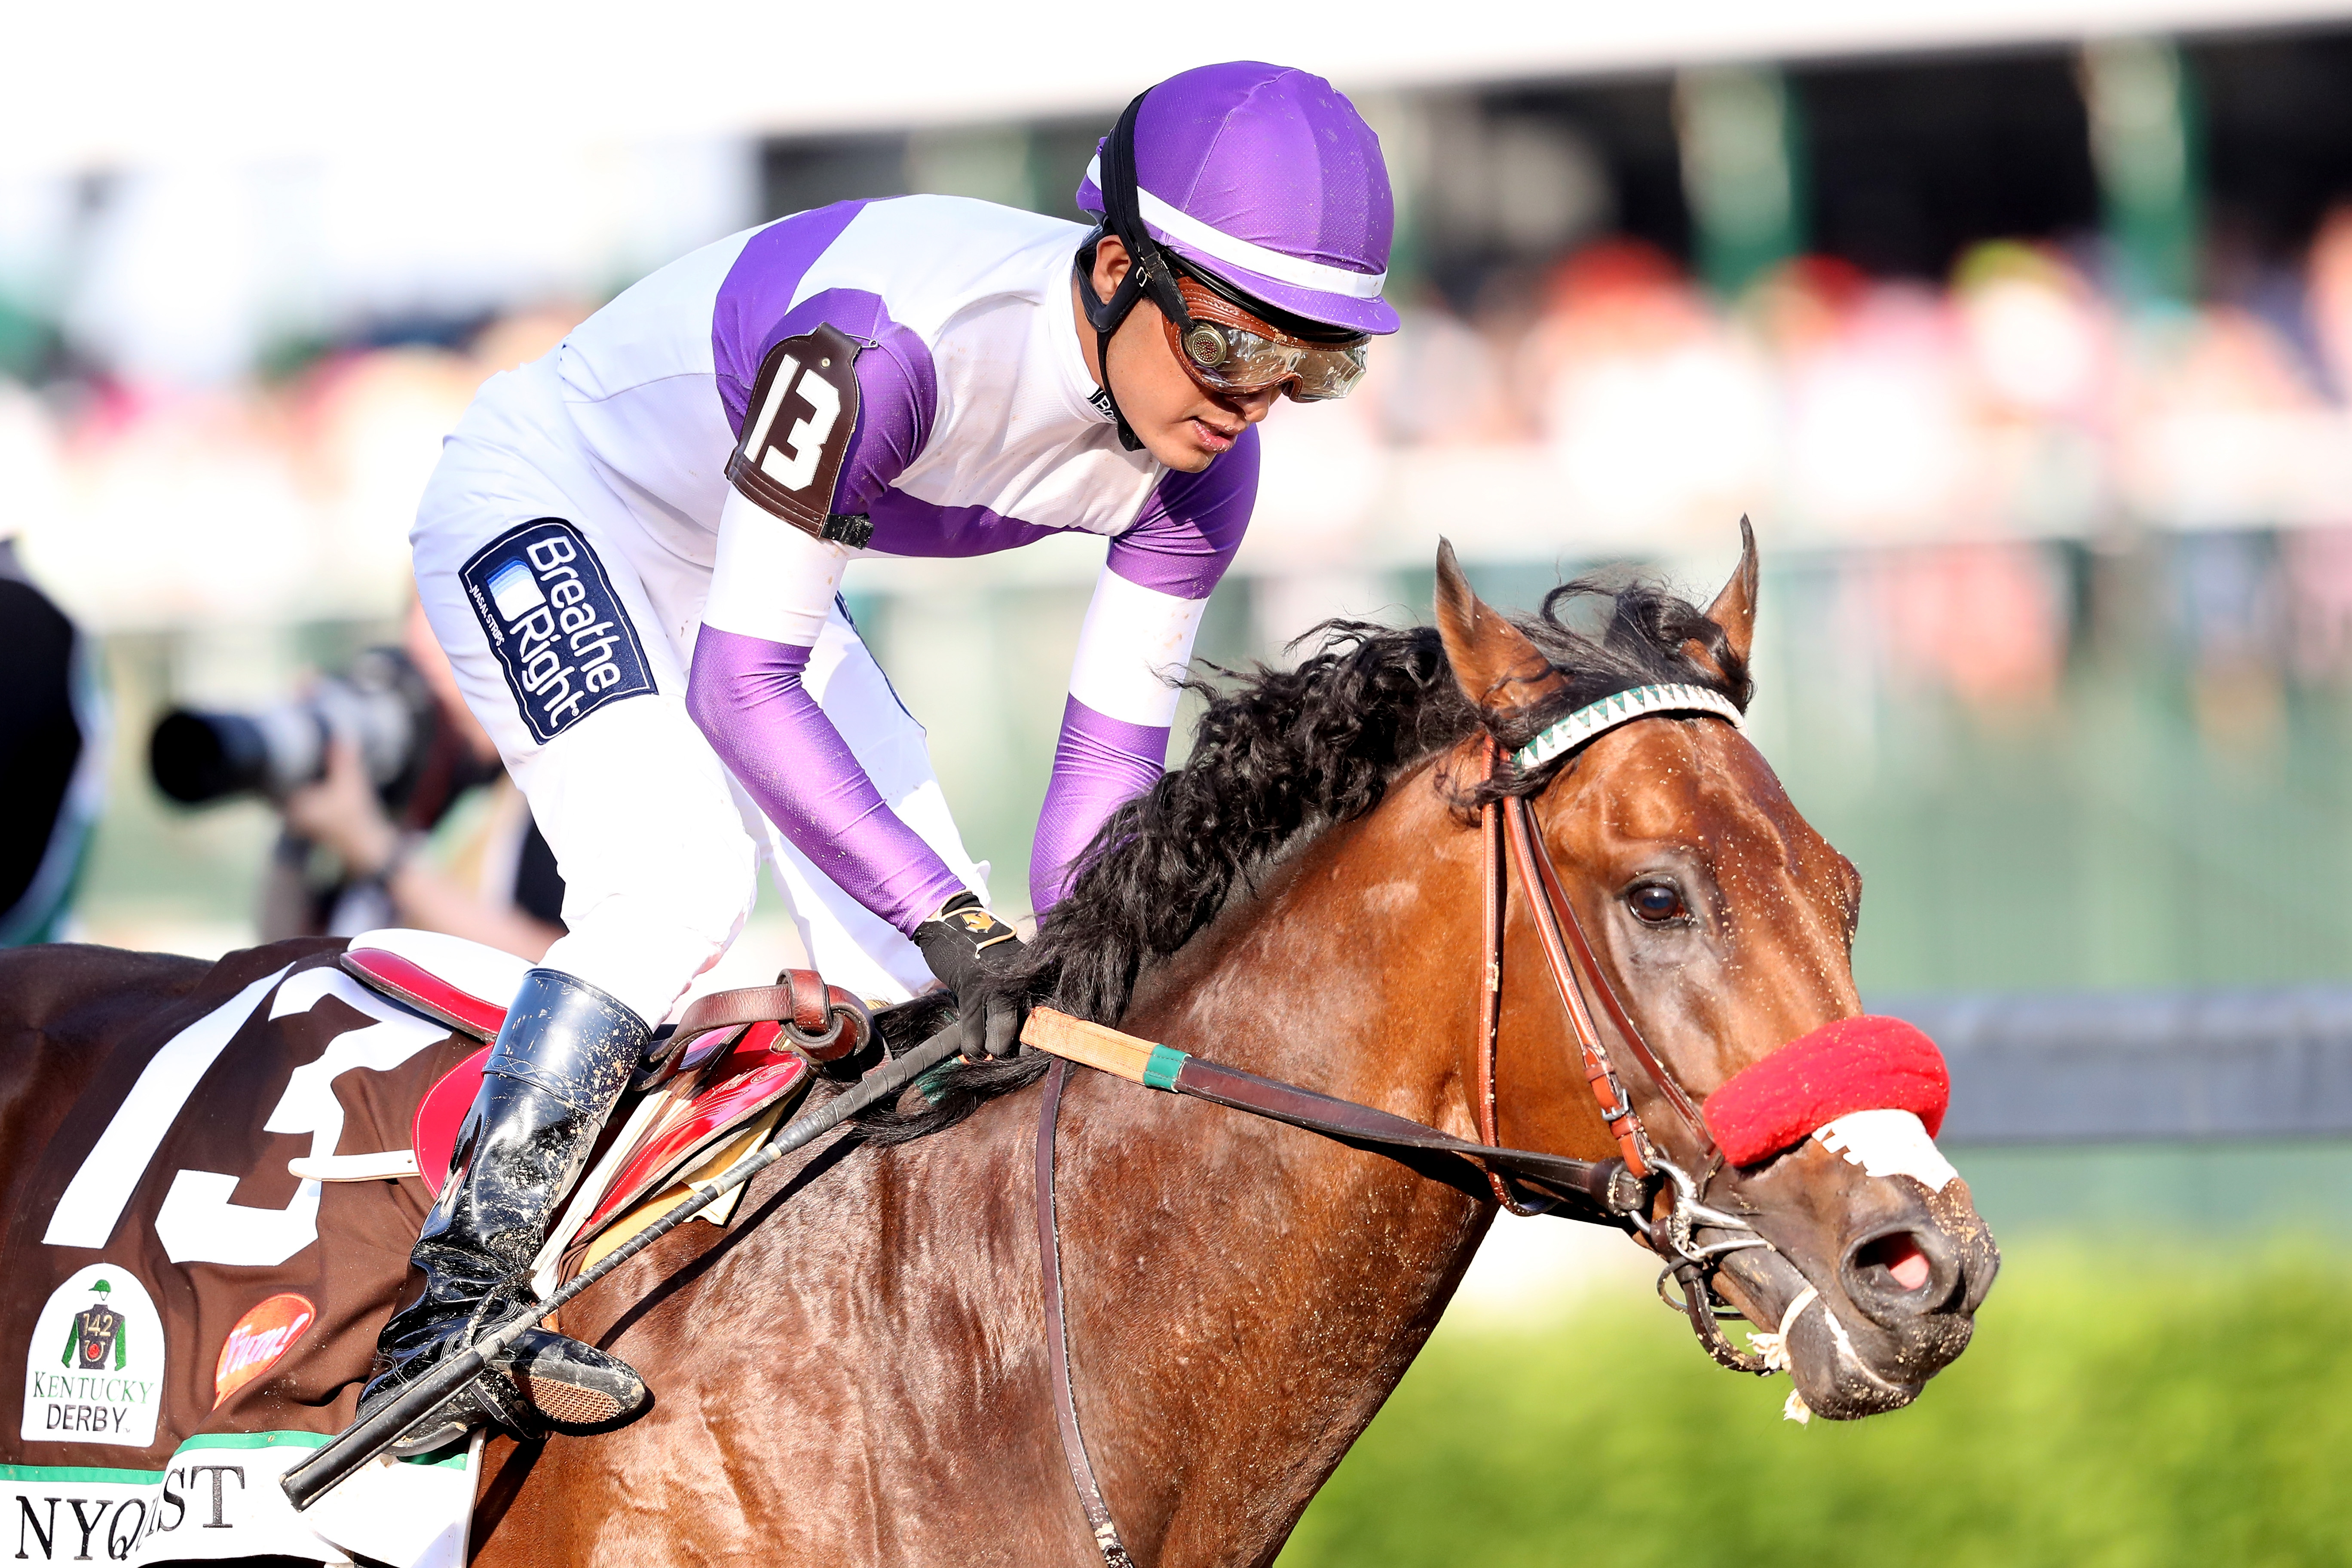 10 incredible photos from undefeated Nyquist’s Kentucky Derby win For